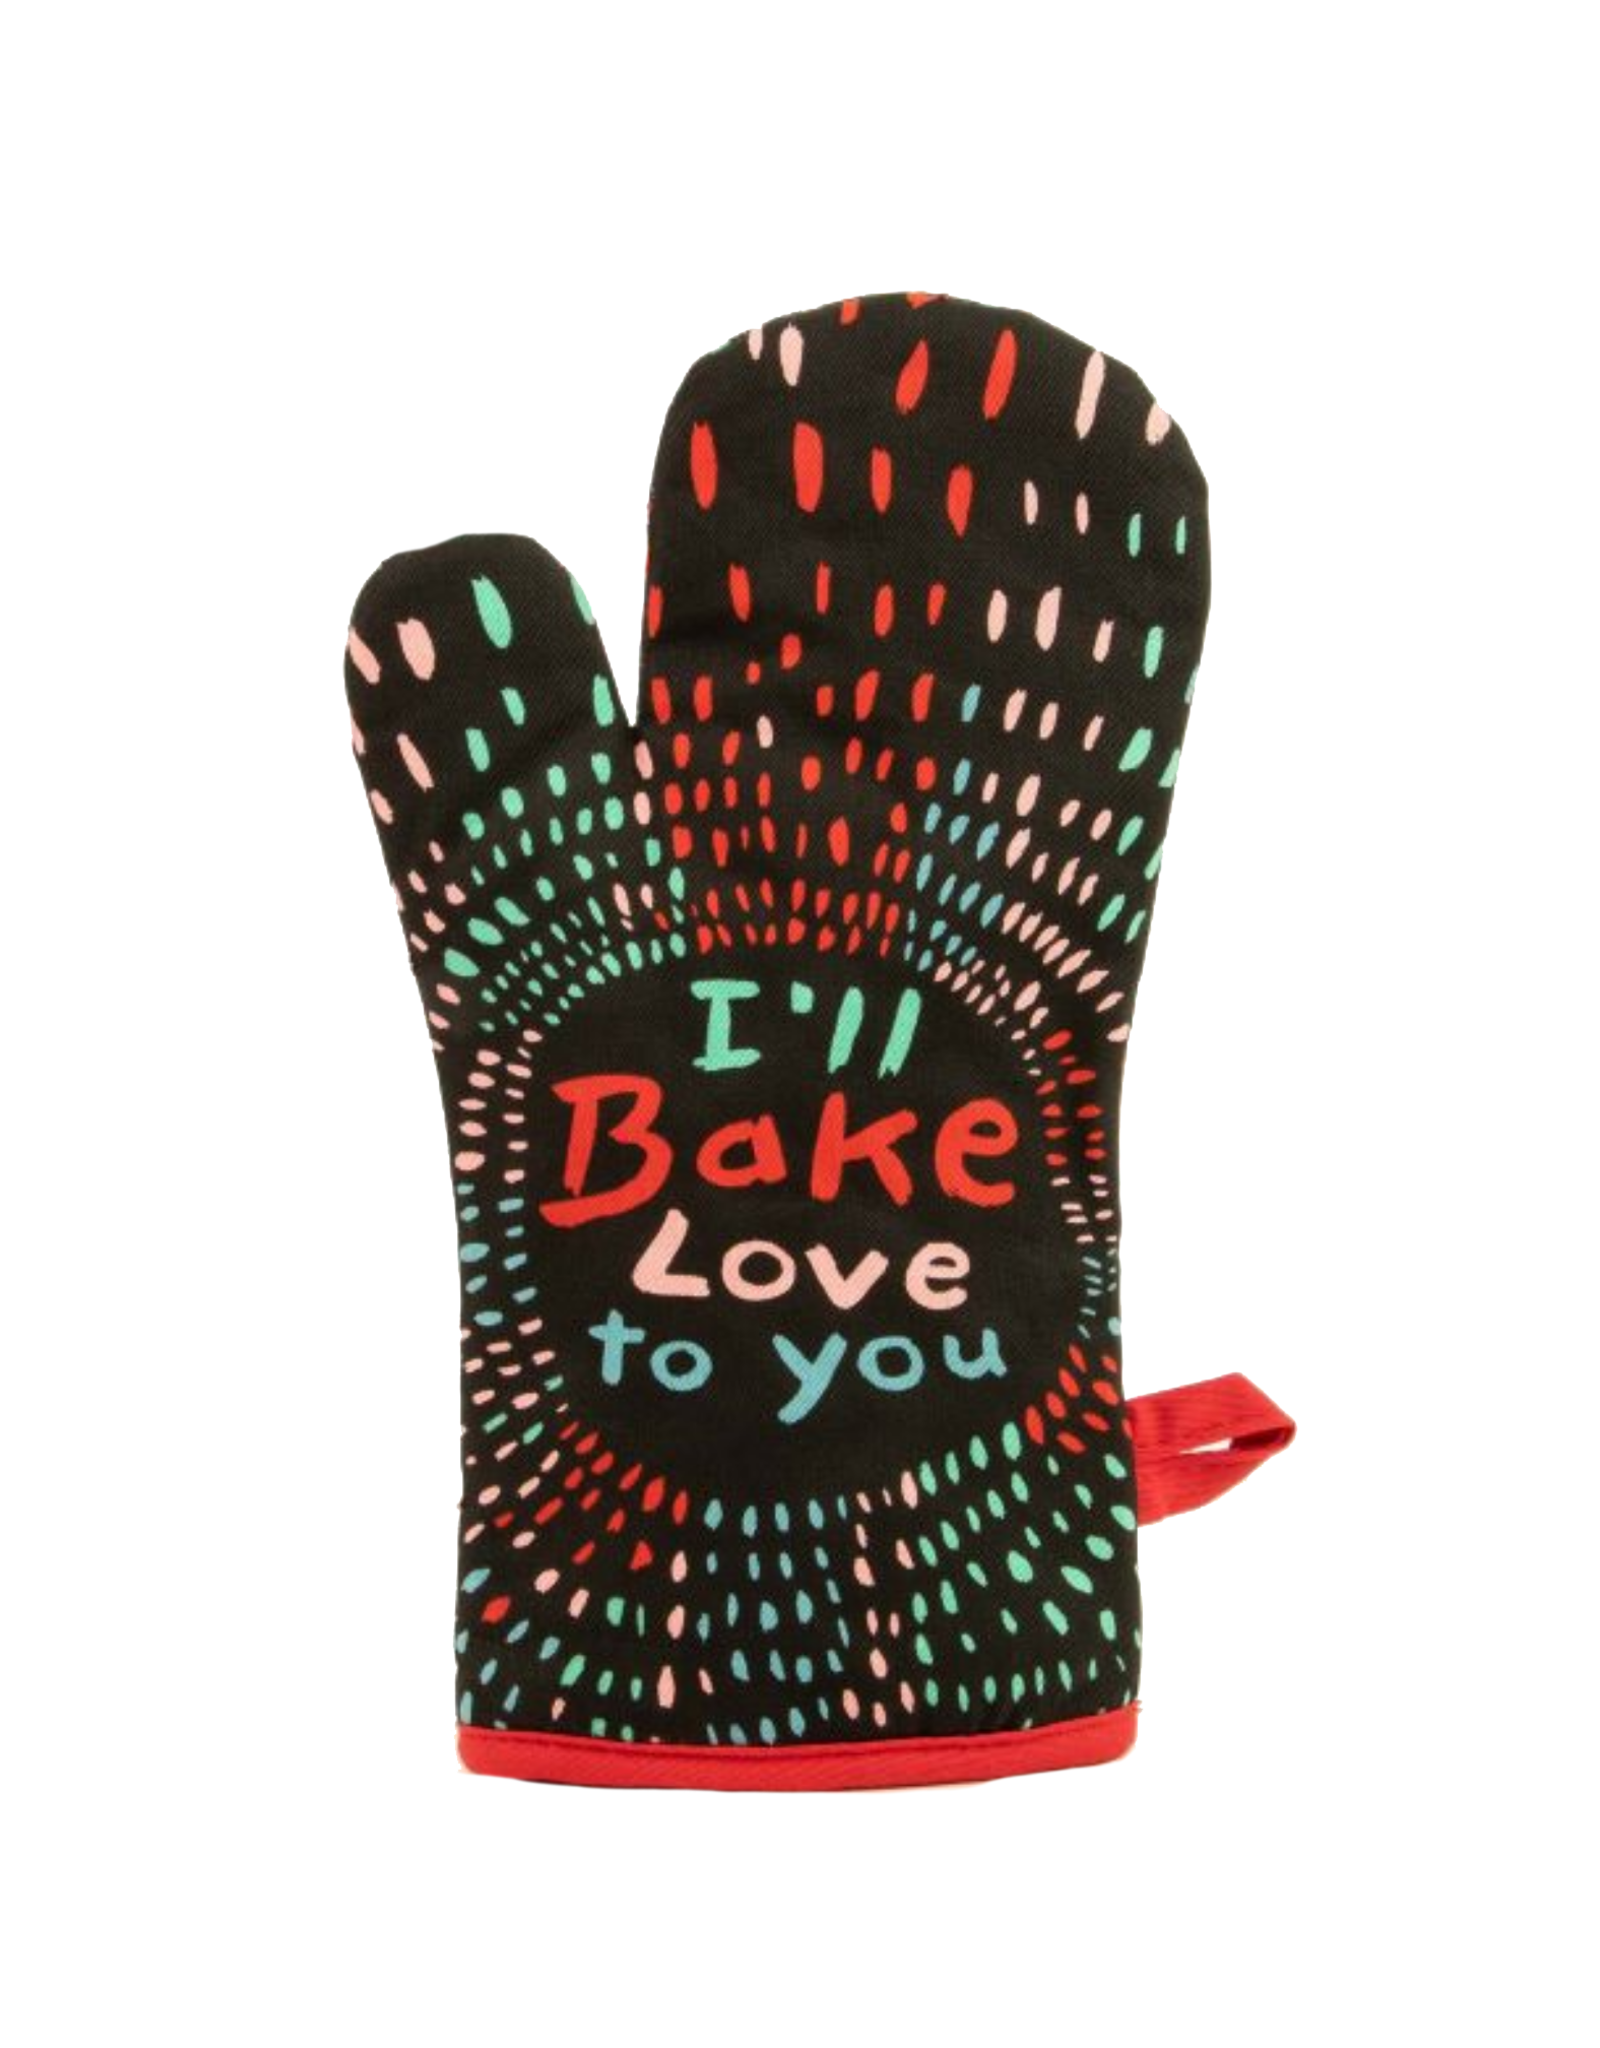 I'll Bake Love To You Oven Mitt *